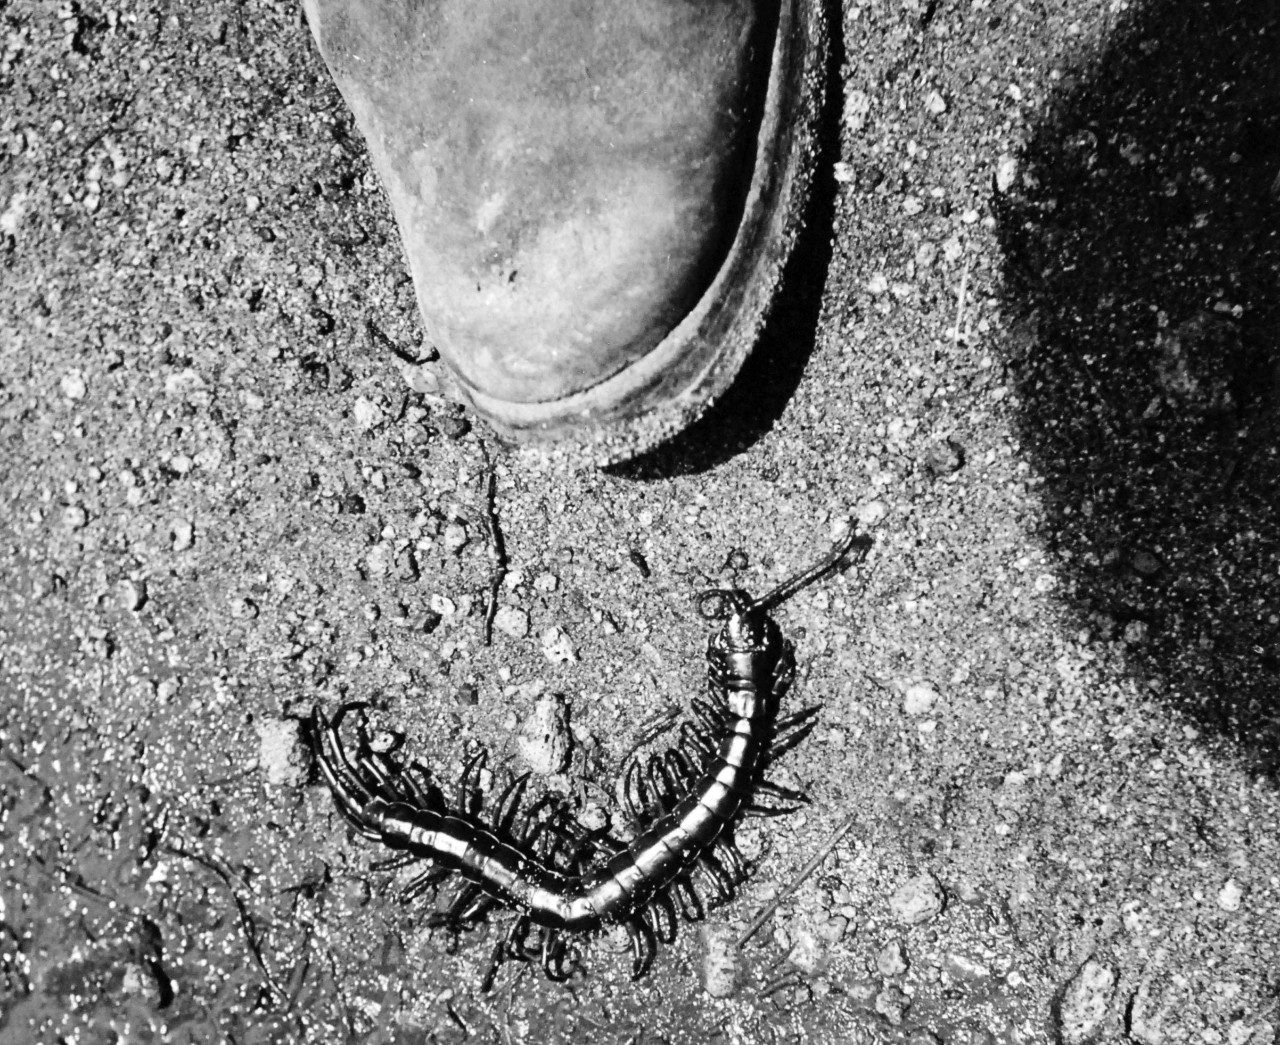 Bougainville Campaign, November 1943-August 1945.   High on the list of minor hazards in the South Pacific jungle is the centipede on Bougainville.  Finding their way into shoes, clothing and beds.  These poisonous creatures bite viciously, causing the unwary victim discomfort for days.  So painful is the sting that sometimes even morphine fails to give relief. Steichen Photograph crew, TR-9652, February 1944.   Official U.S Navy Photograph, now in the collections of the National Archives.  (2017/12/13).